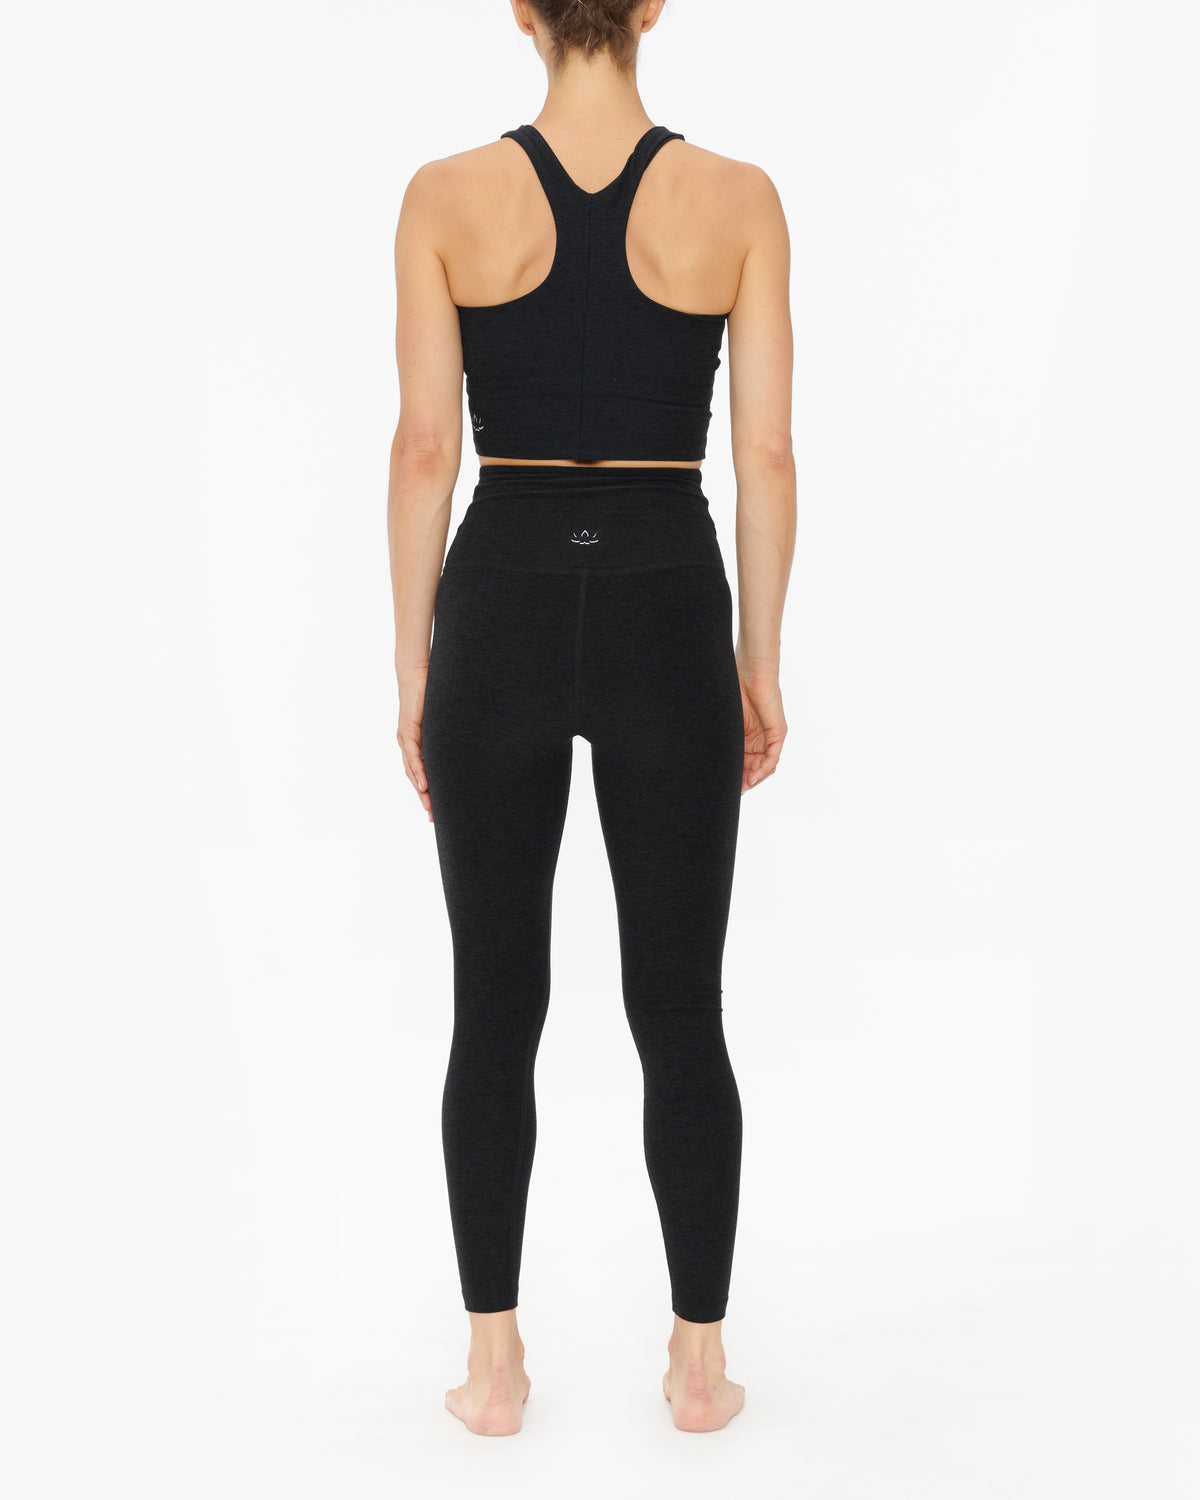 Beyond Yoga At Your Leisure High Waisted Legging – The Shop at Equinox